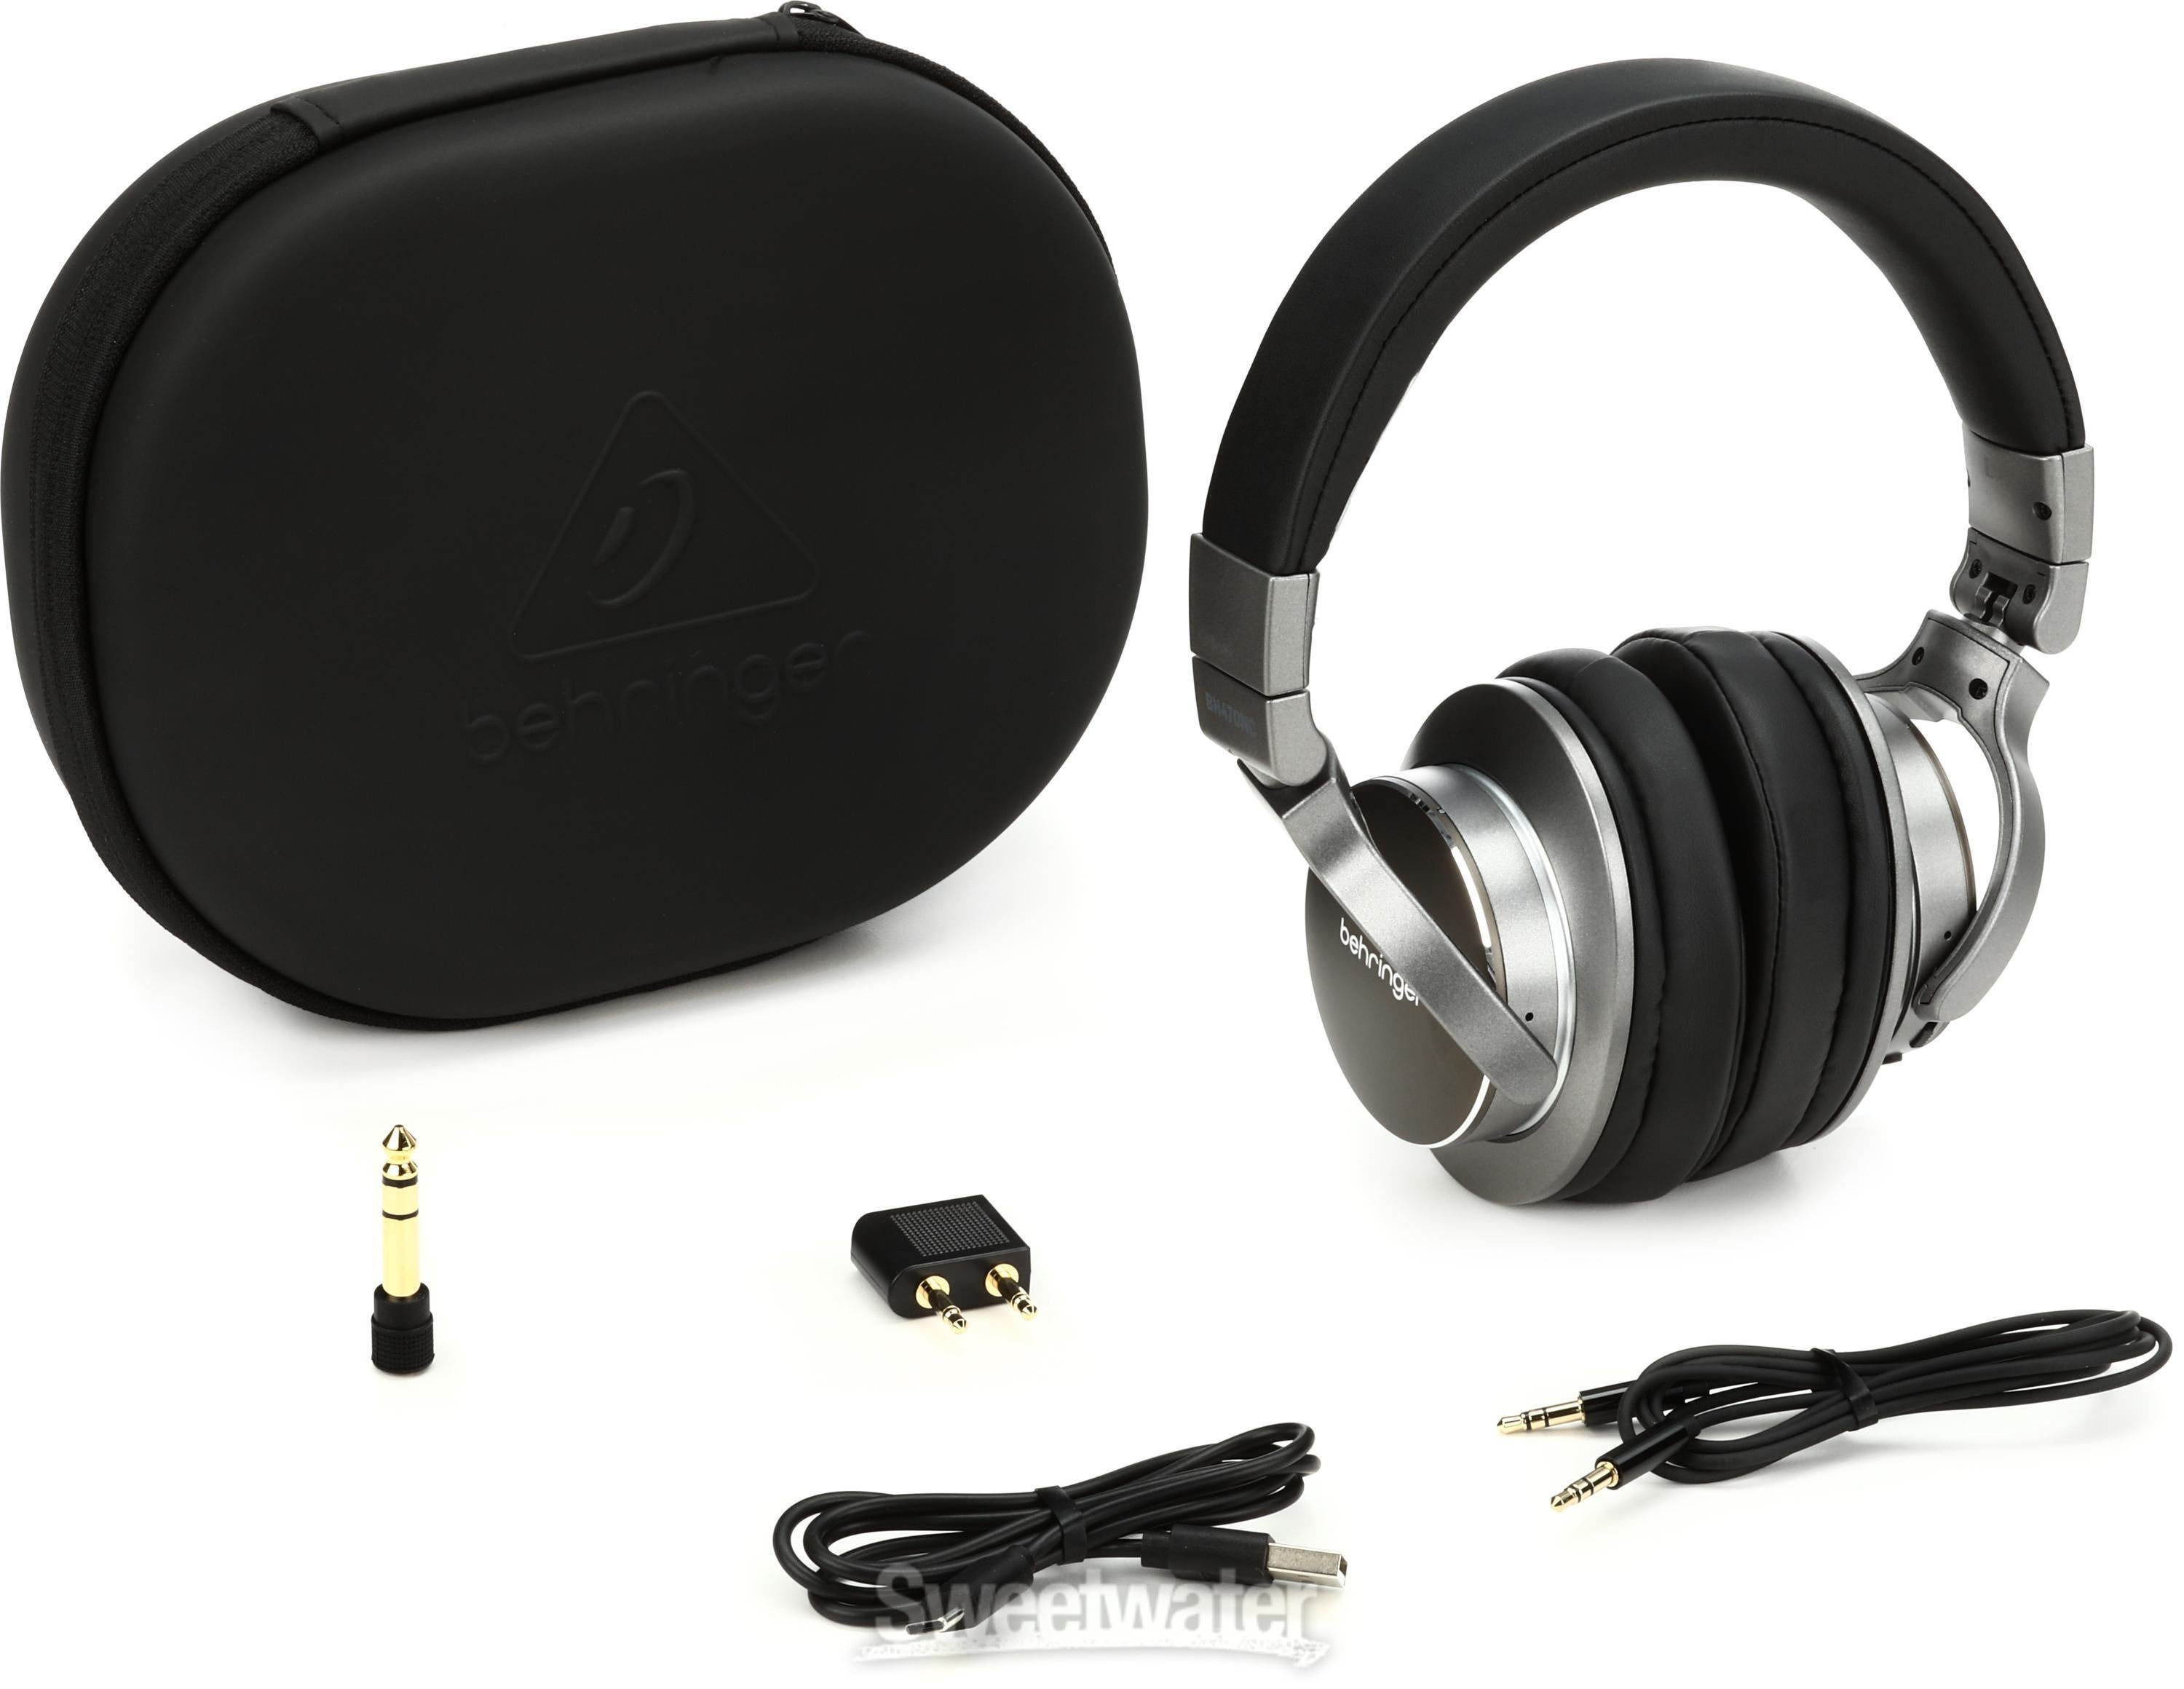 BH470NC Active Noise-canceling Bluetooth Headphones - Sweetwater